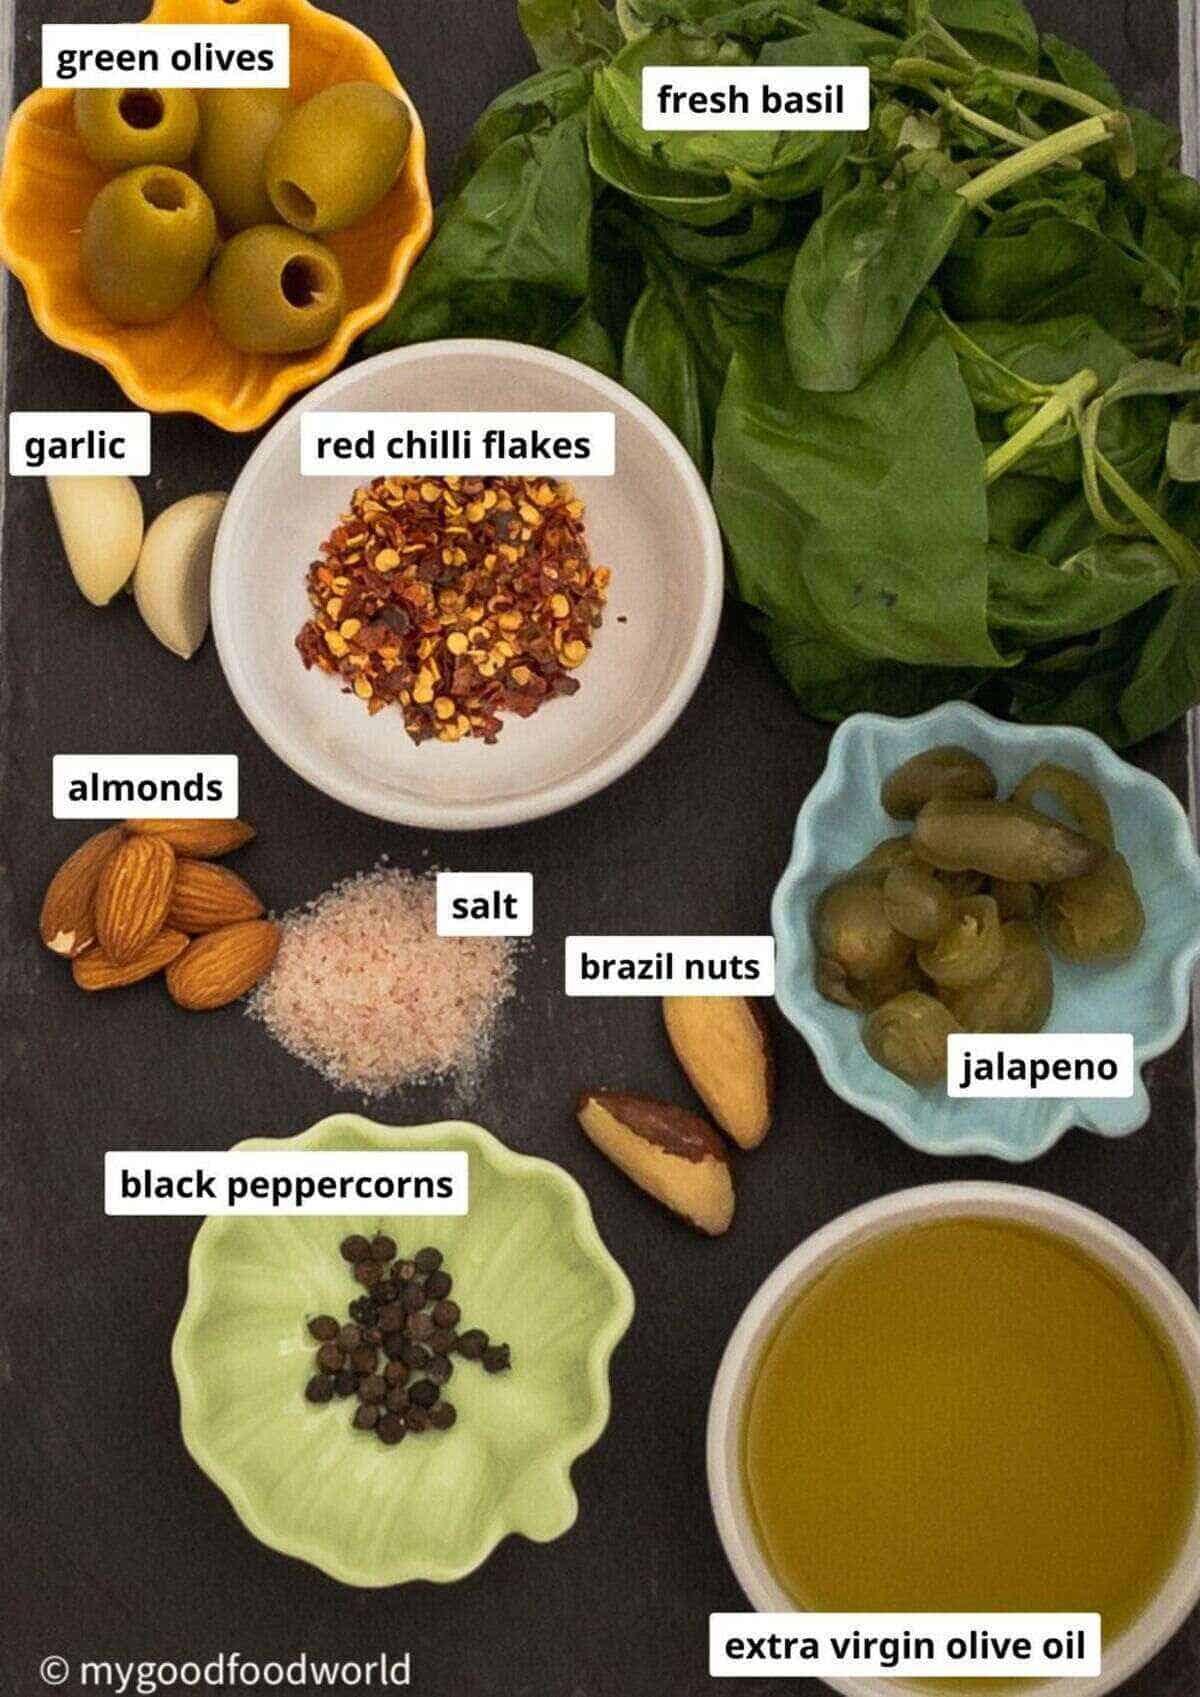 Recipe ingredients for vegan pesto are placed in small bowls on a black background.